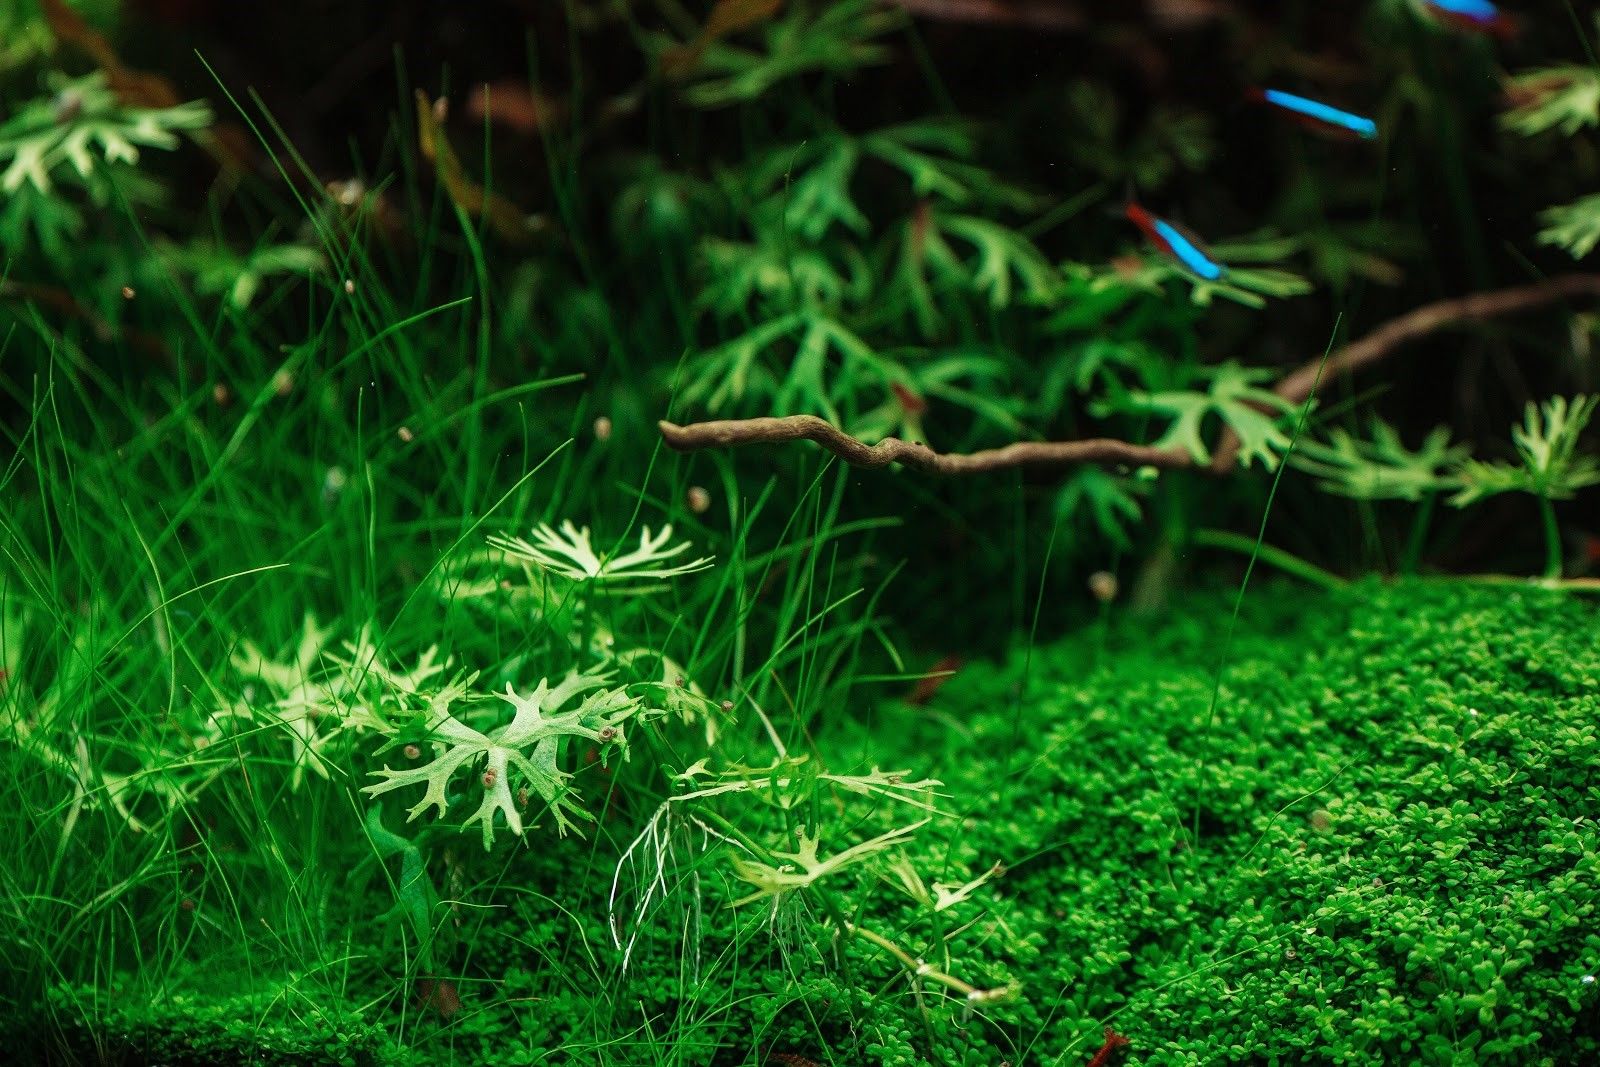 Close-up of plants in an aquascape with neon tetra fish in the background.